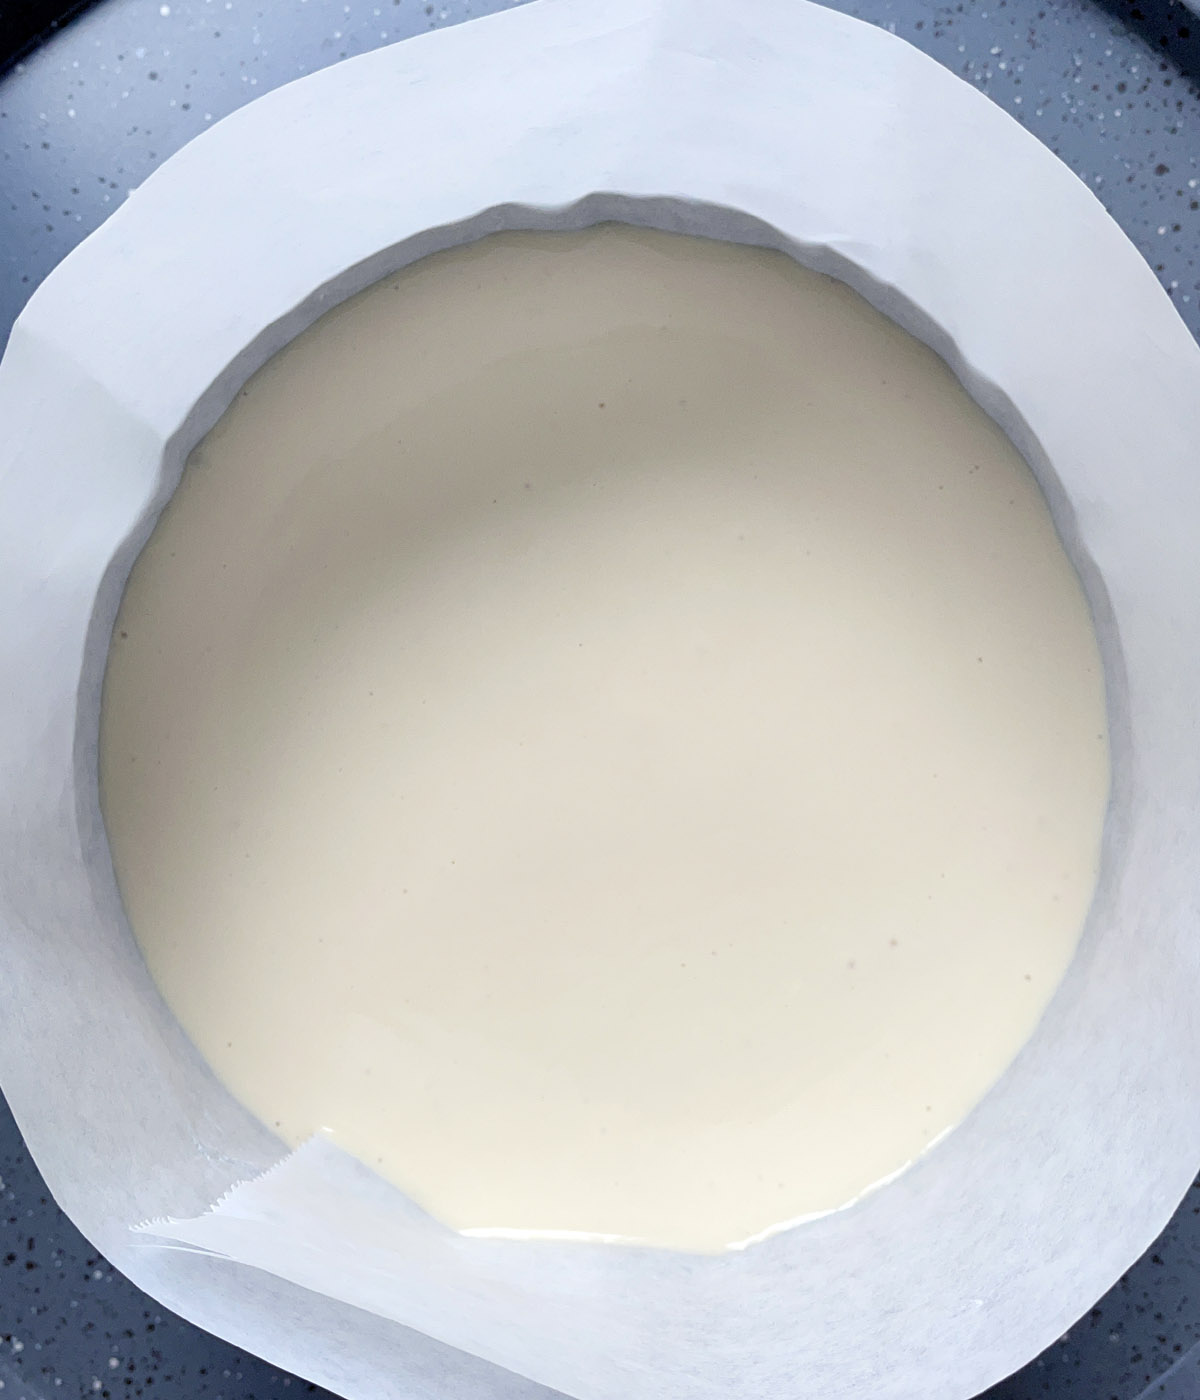 White batter in a paper lined round pan.